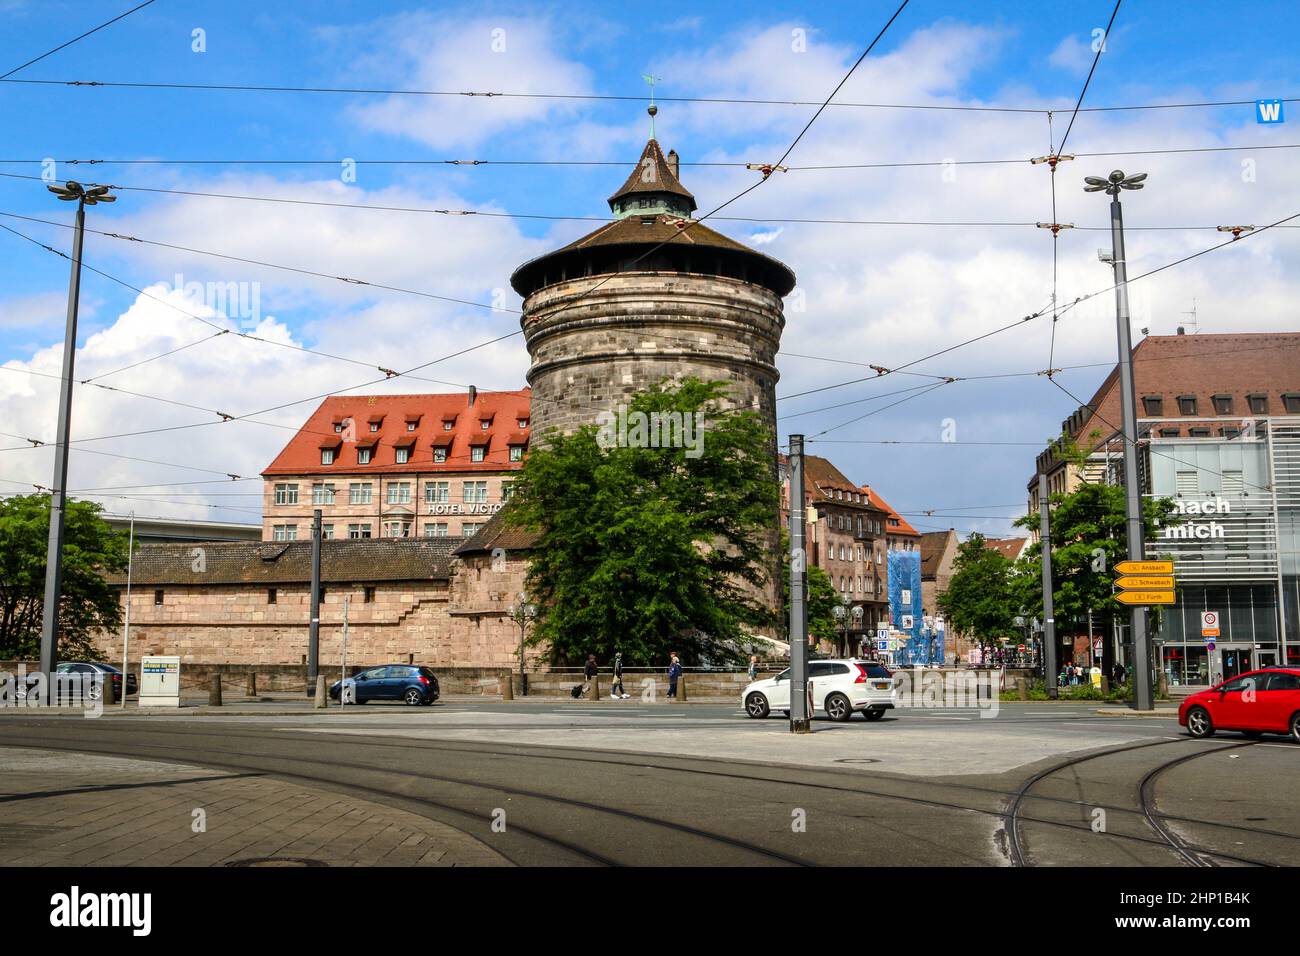 Views from Nuremberg Old Town, Germany Stock Photo